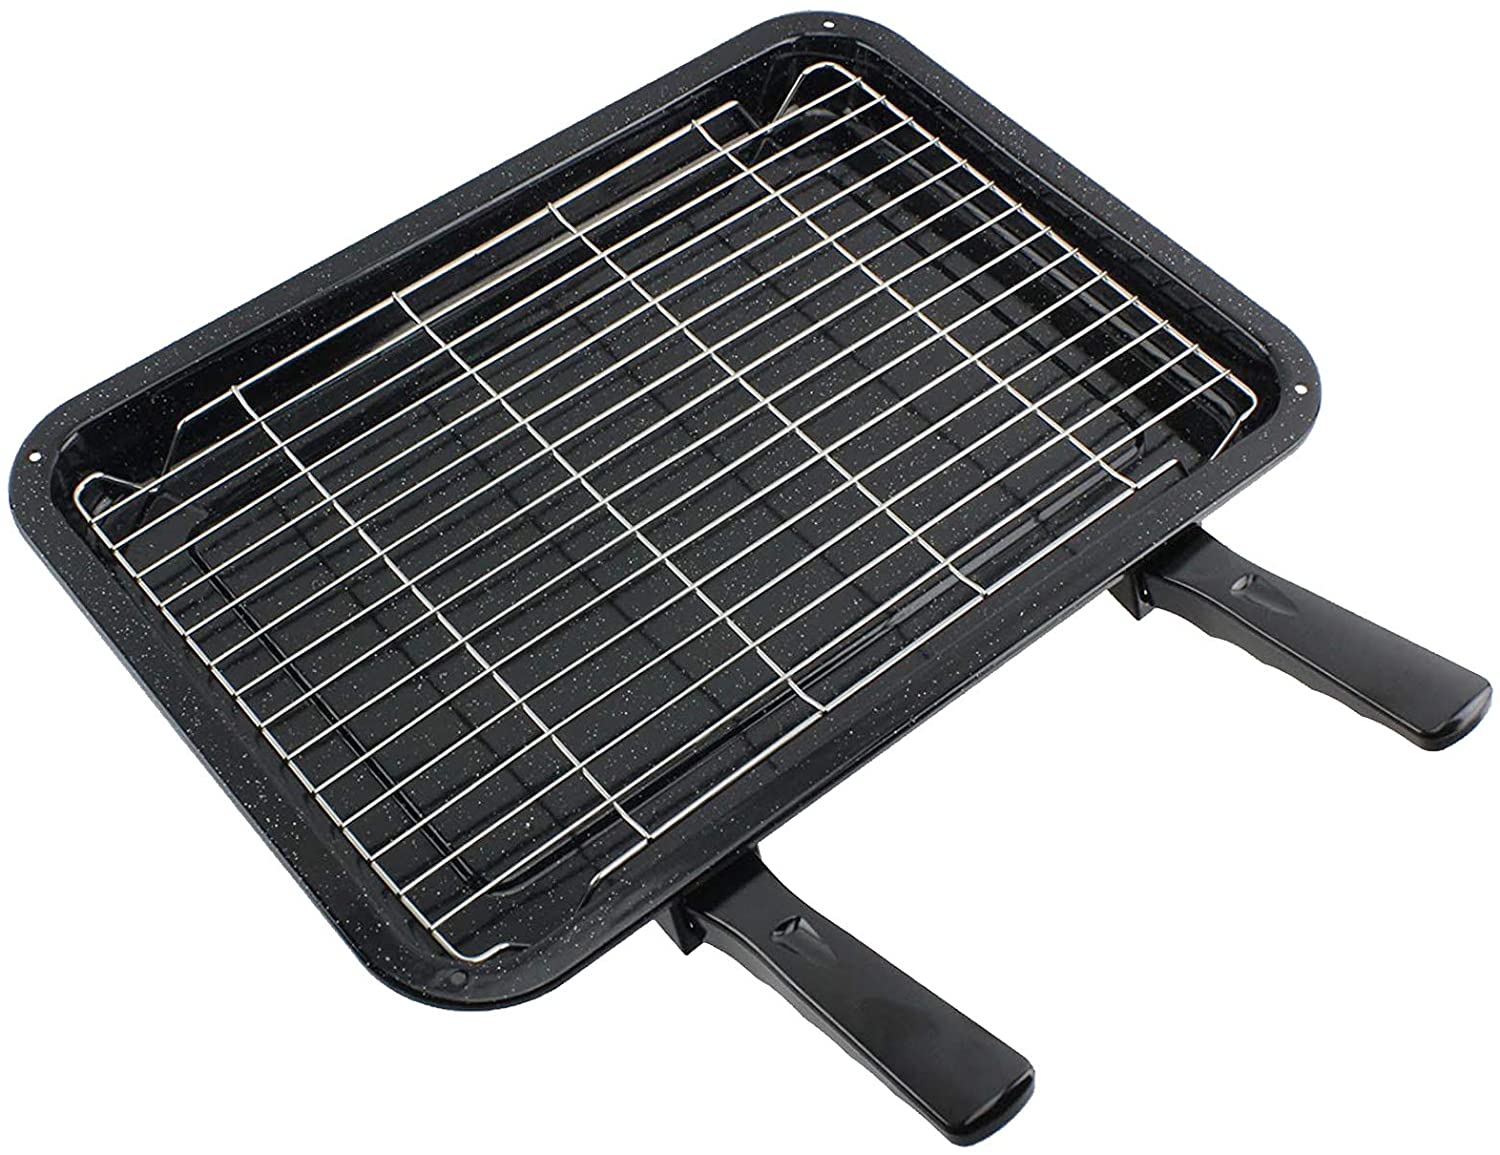 Medium Grill Pan, Rack & Dual Detachable Handles with Adjustable Shelf for INDESIT Oven Cookers